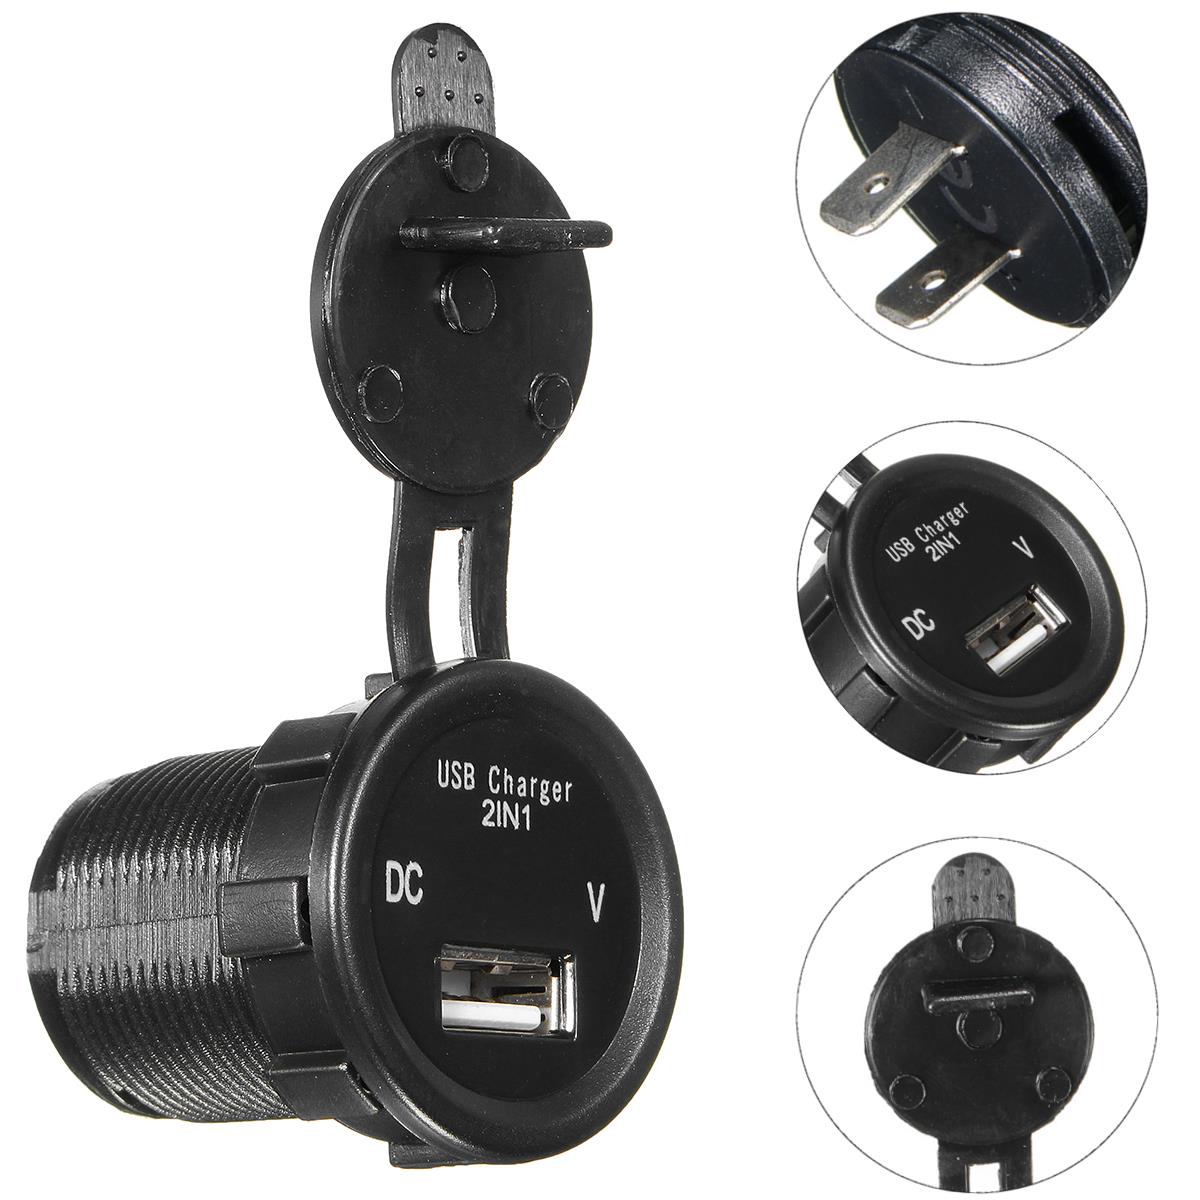 2-in1-Universal-USB-12-24V-Car-Charger-With-Automobile-Voltmeter-Disply-For-iphone-X-88Plus-Samsung-1236131